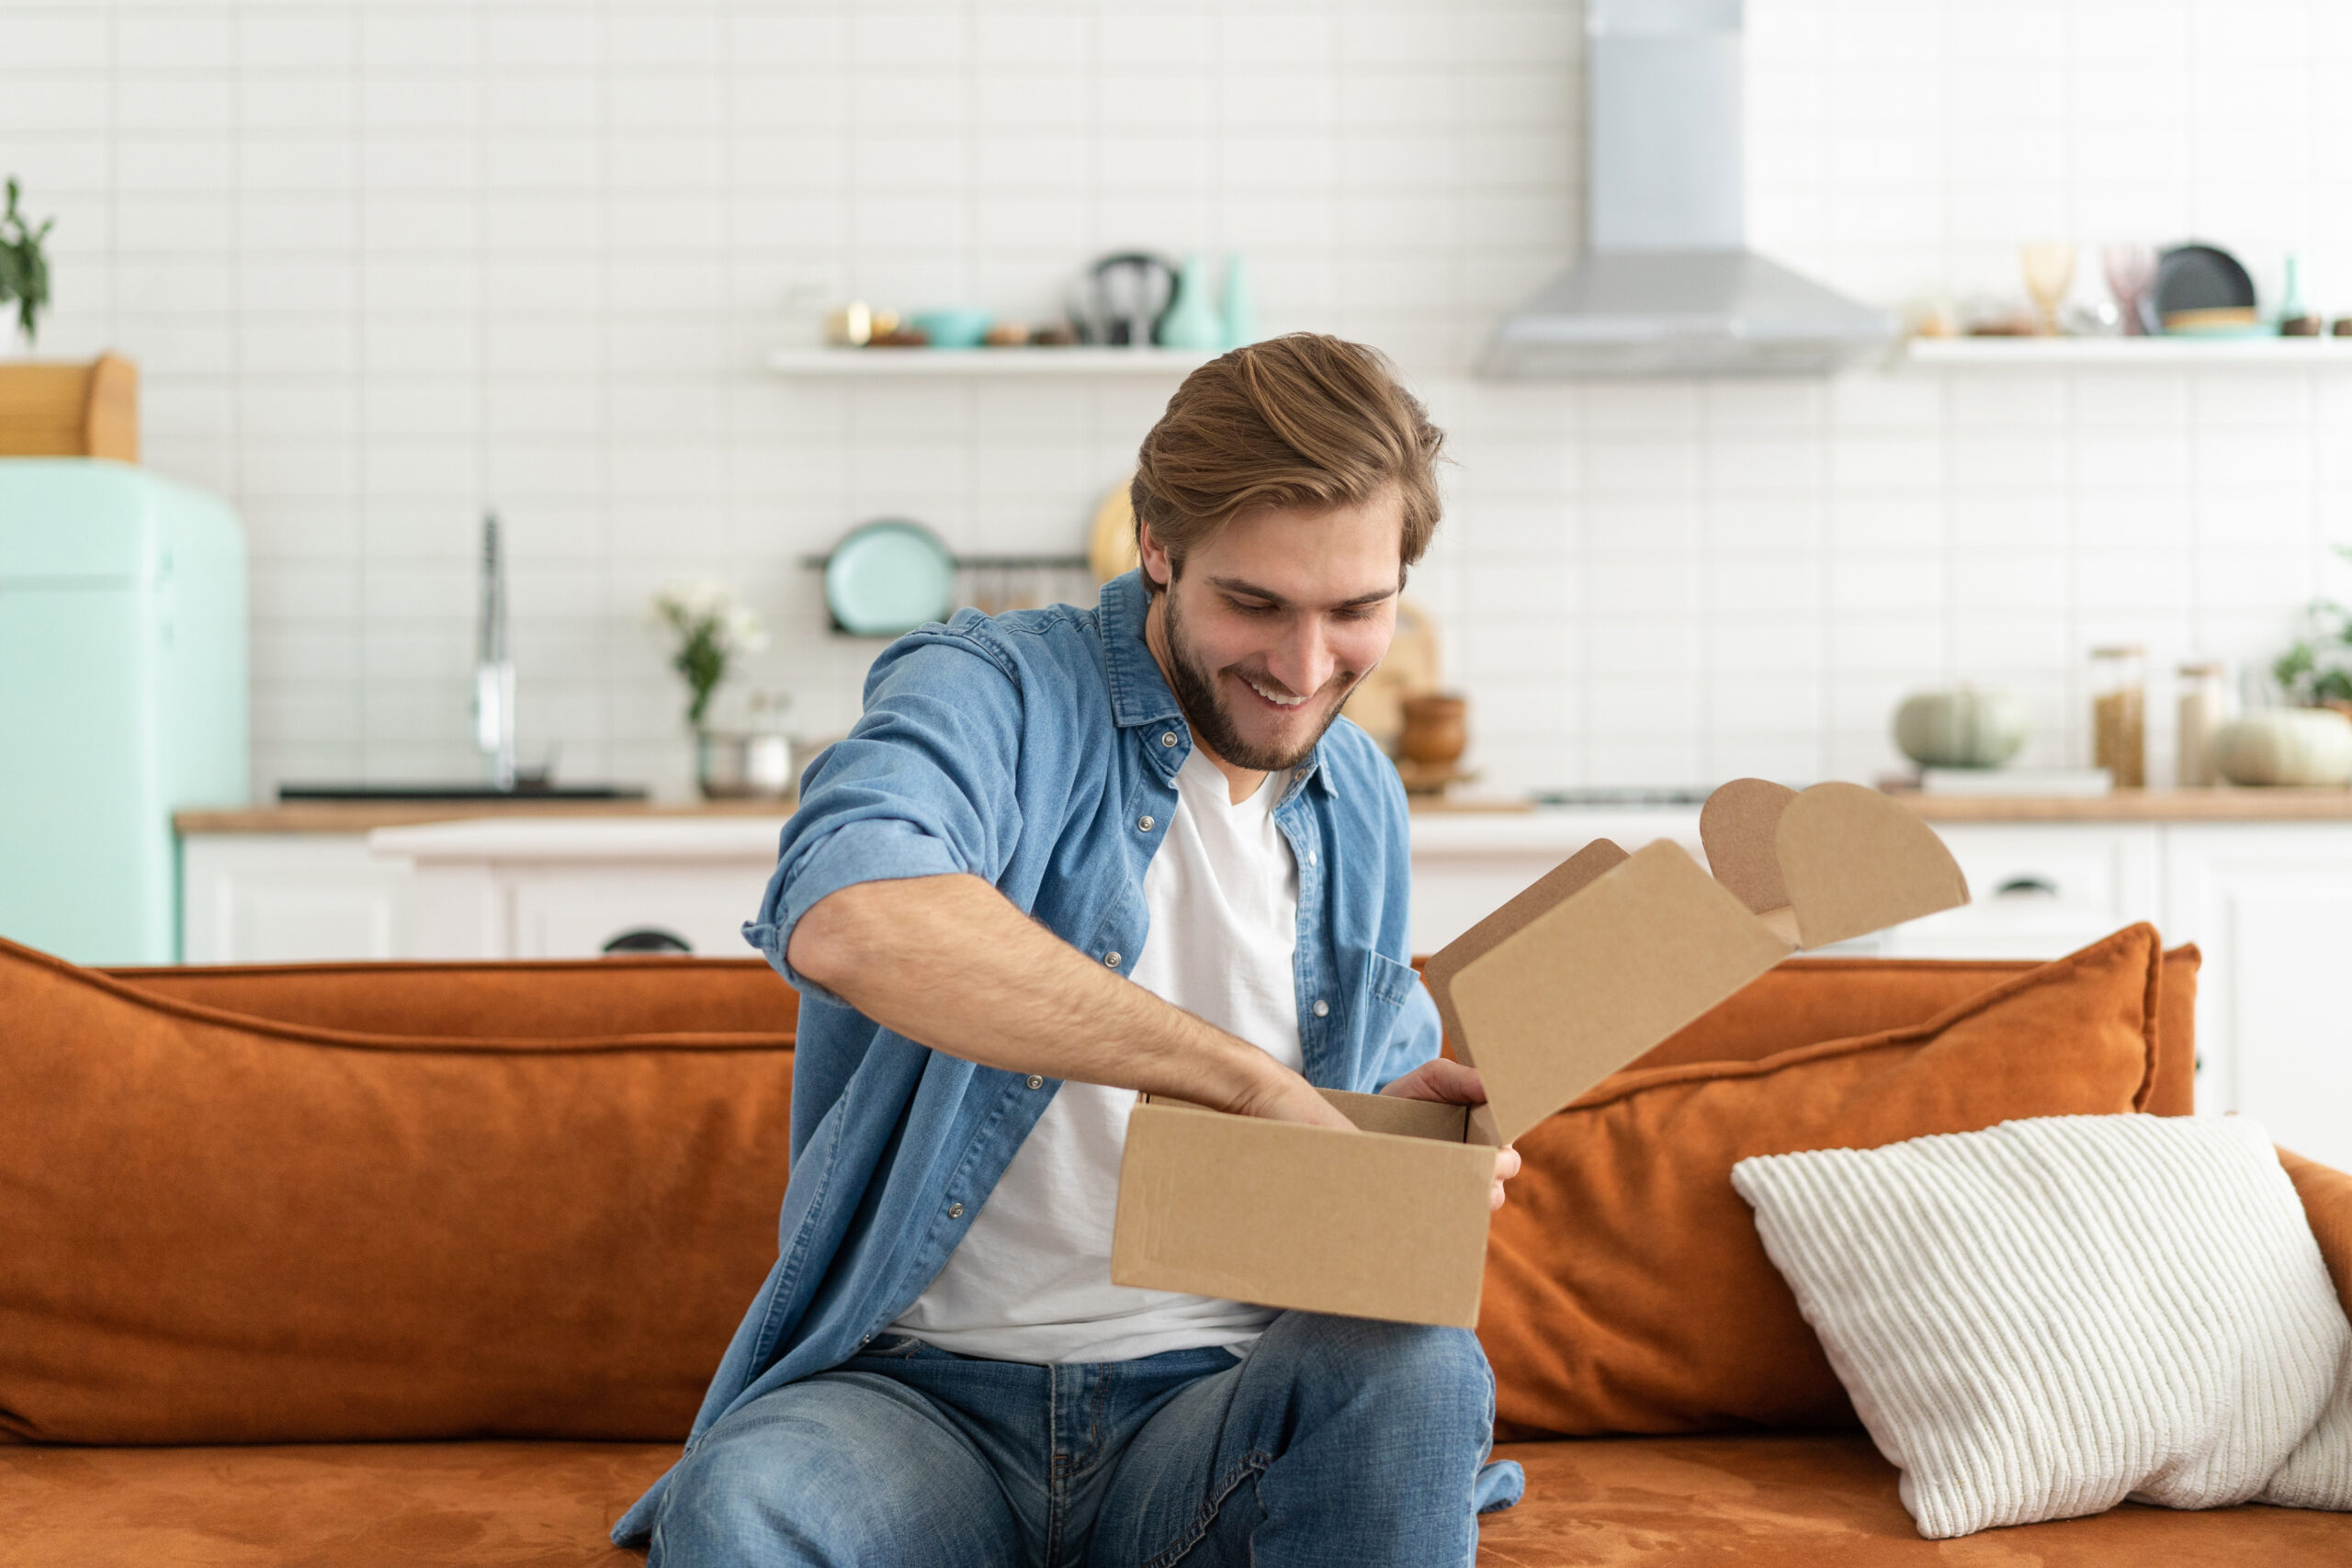 White man with blond hair sits on a burnt orange couch opening a box